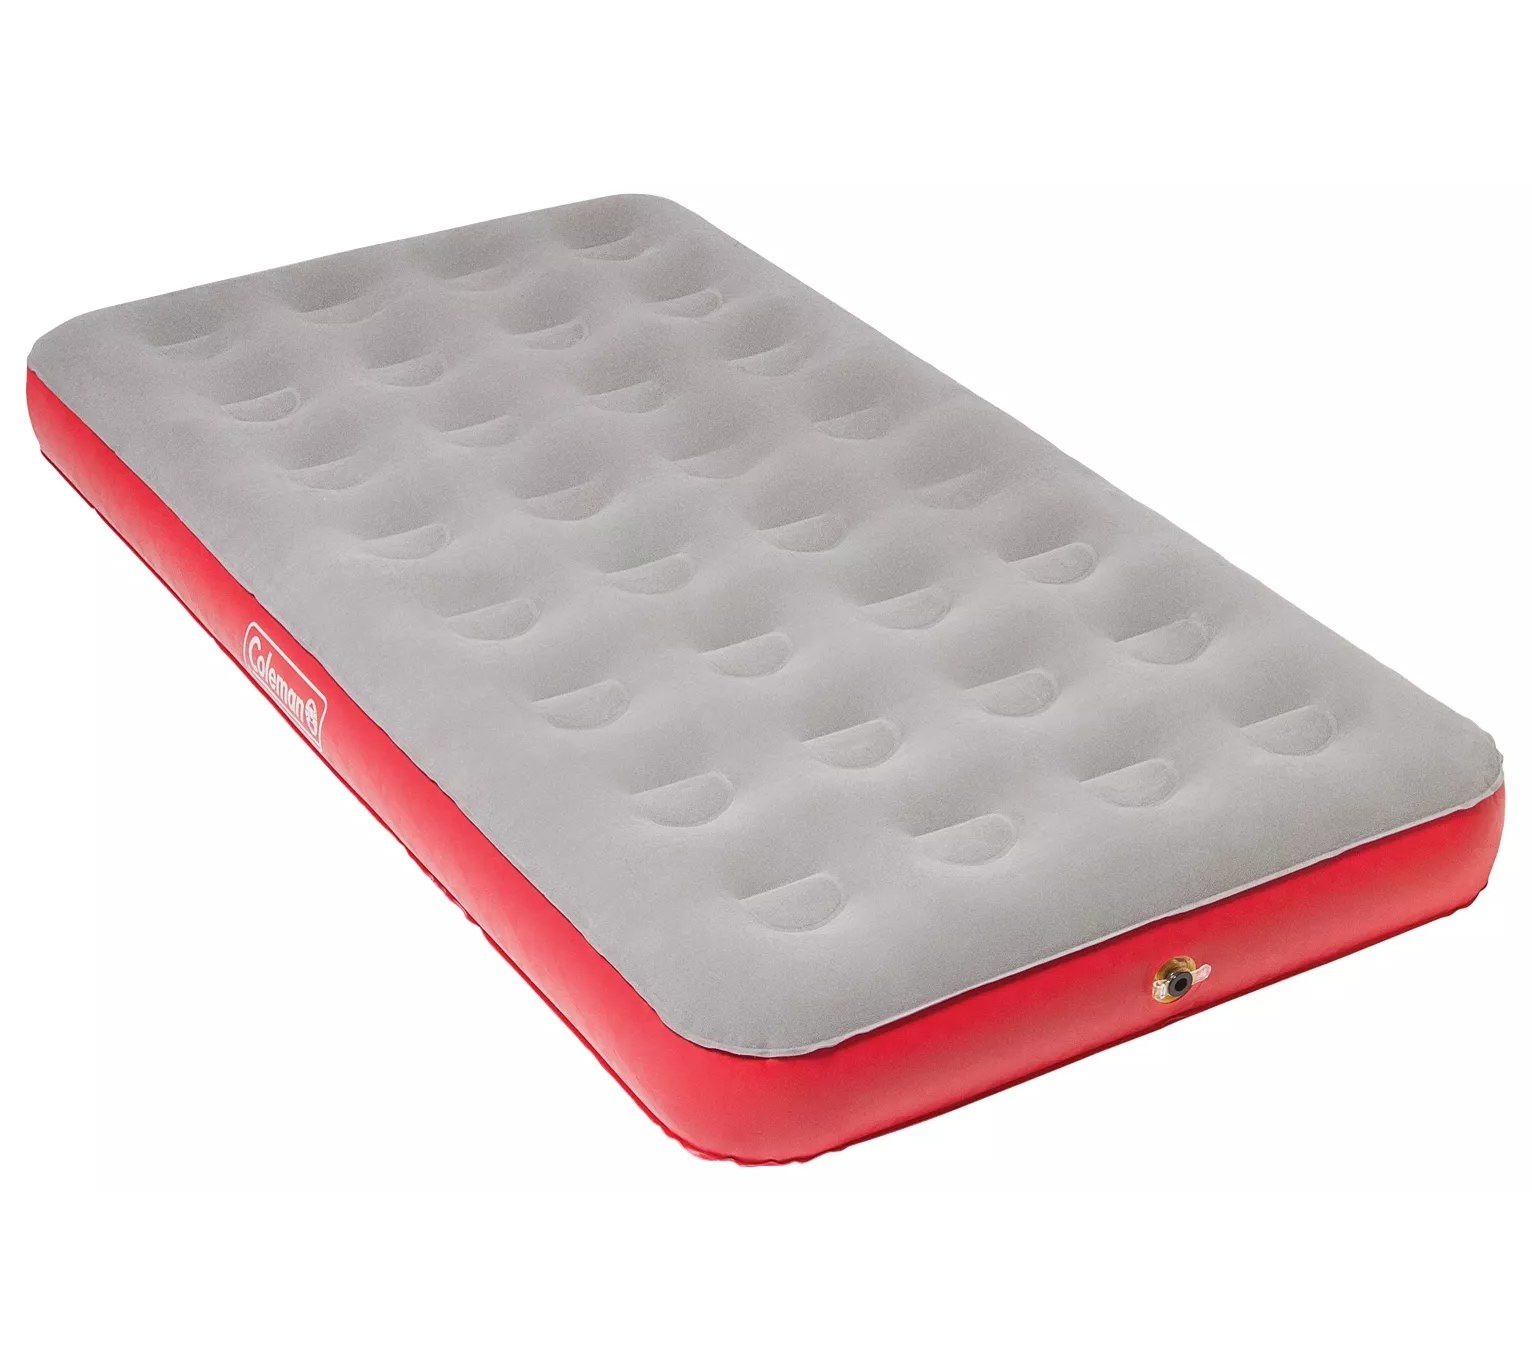 the grey and red mattress